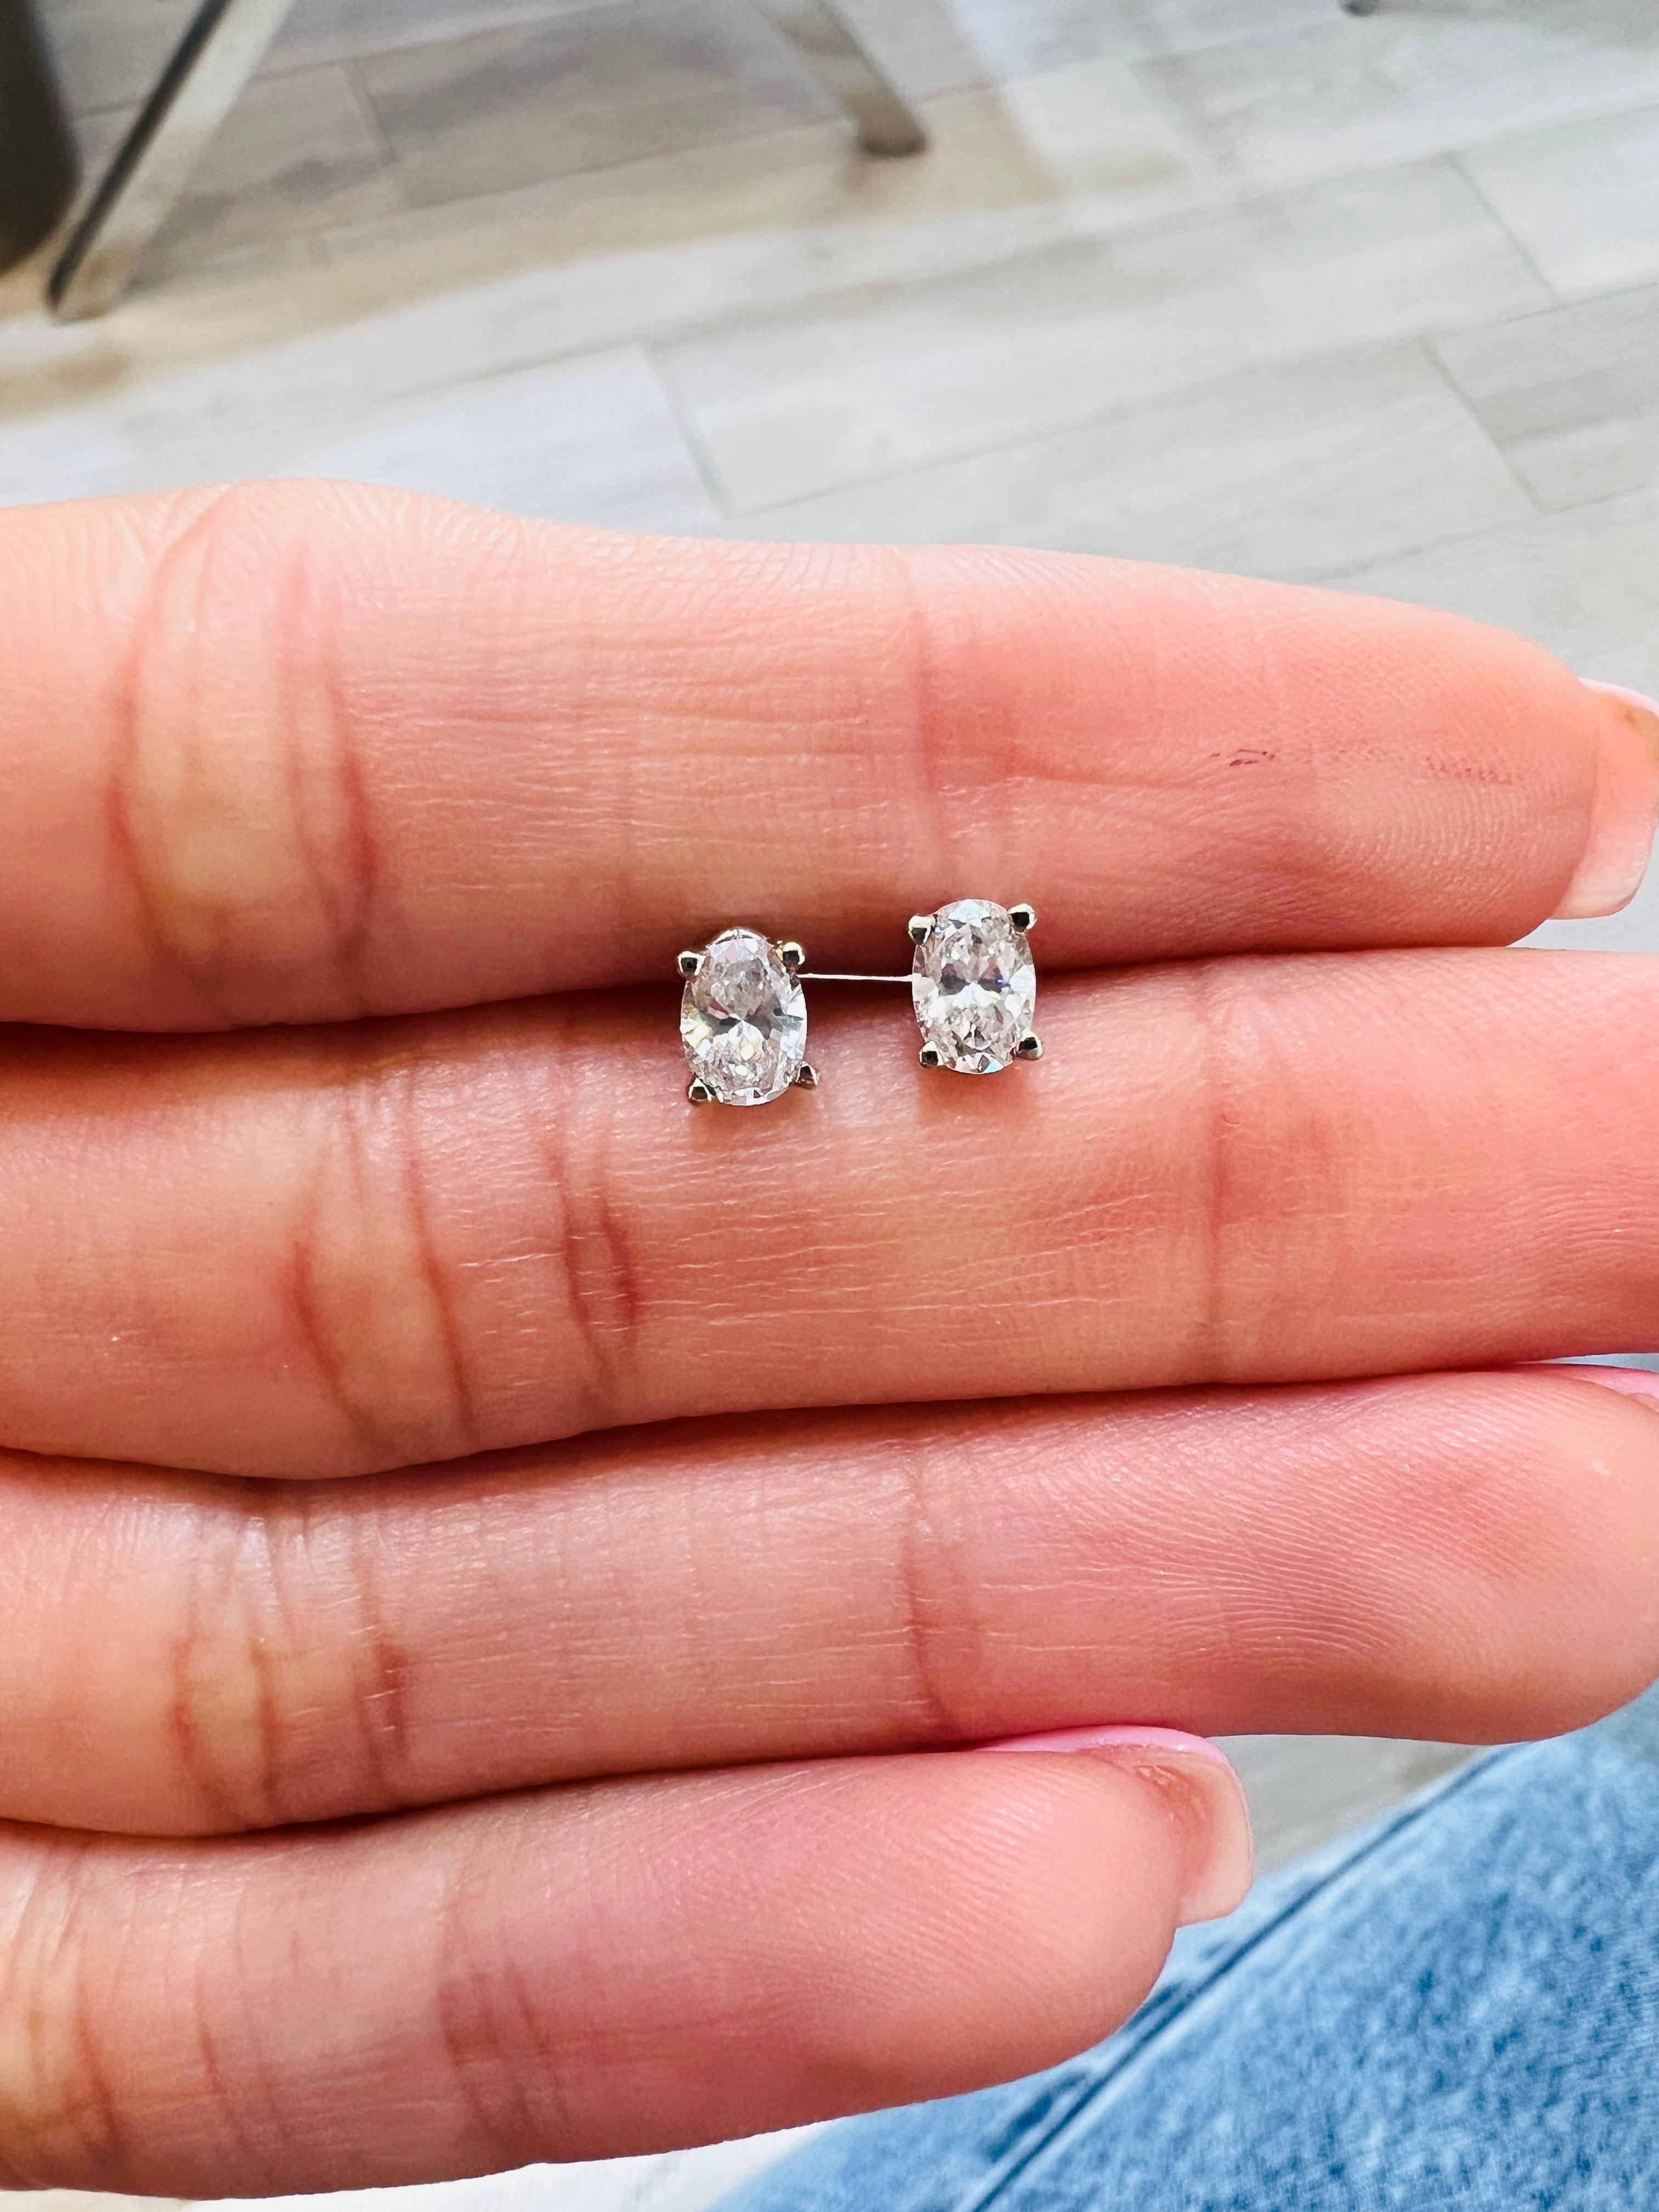 These lovely oval stud earrings are perfect for any ear! These are beautiful alone or worn as an accent next to larger earrings! The total weight of these diamonds is 0.50 carats (or slightly more) with near-colorless G-I color and VS-SI clarity.